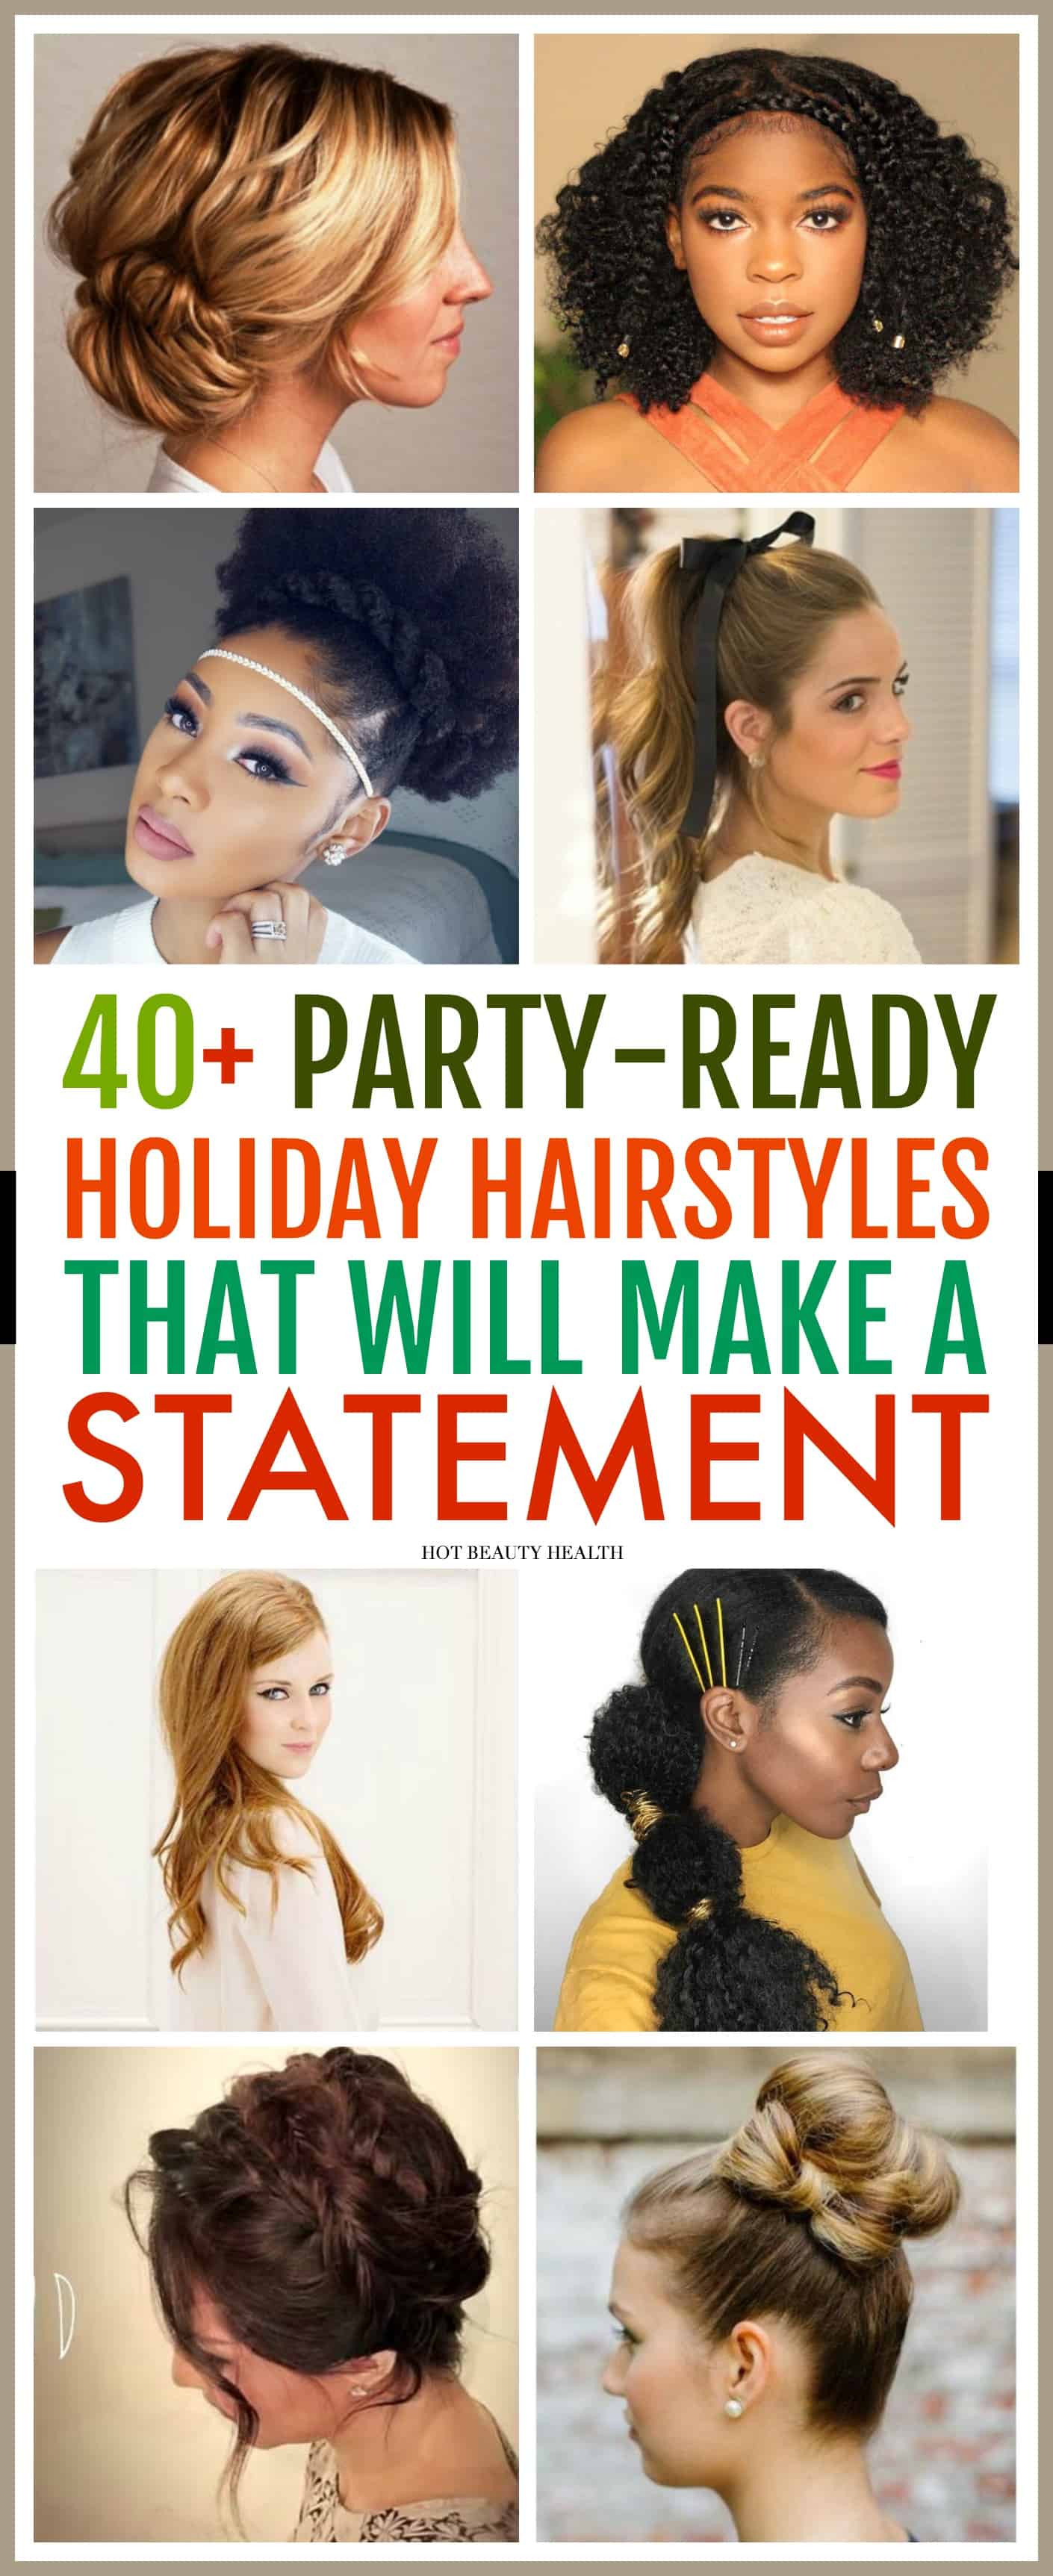 40+ Easy Holiday Hairstyles That Will Make a Statement at Thanksgiving or Christmas parties. Find a style for short, medium, long, natural, or curly hair. Click pin for tutorials!